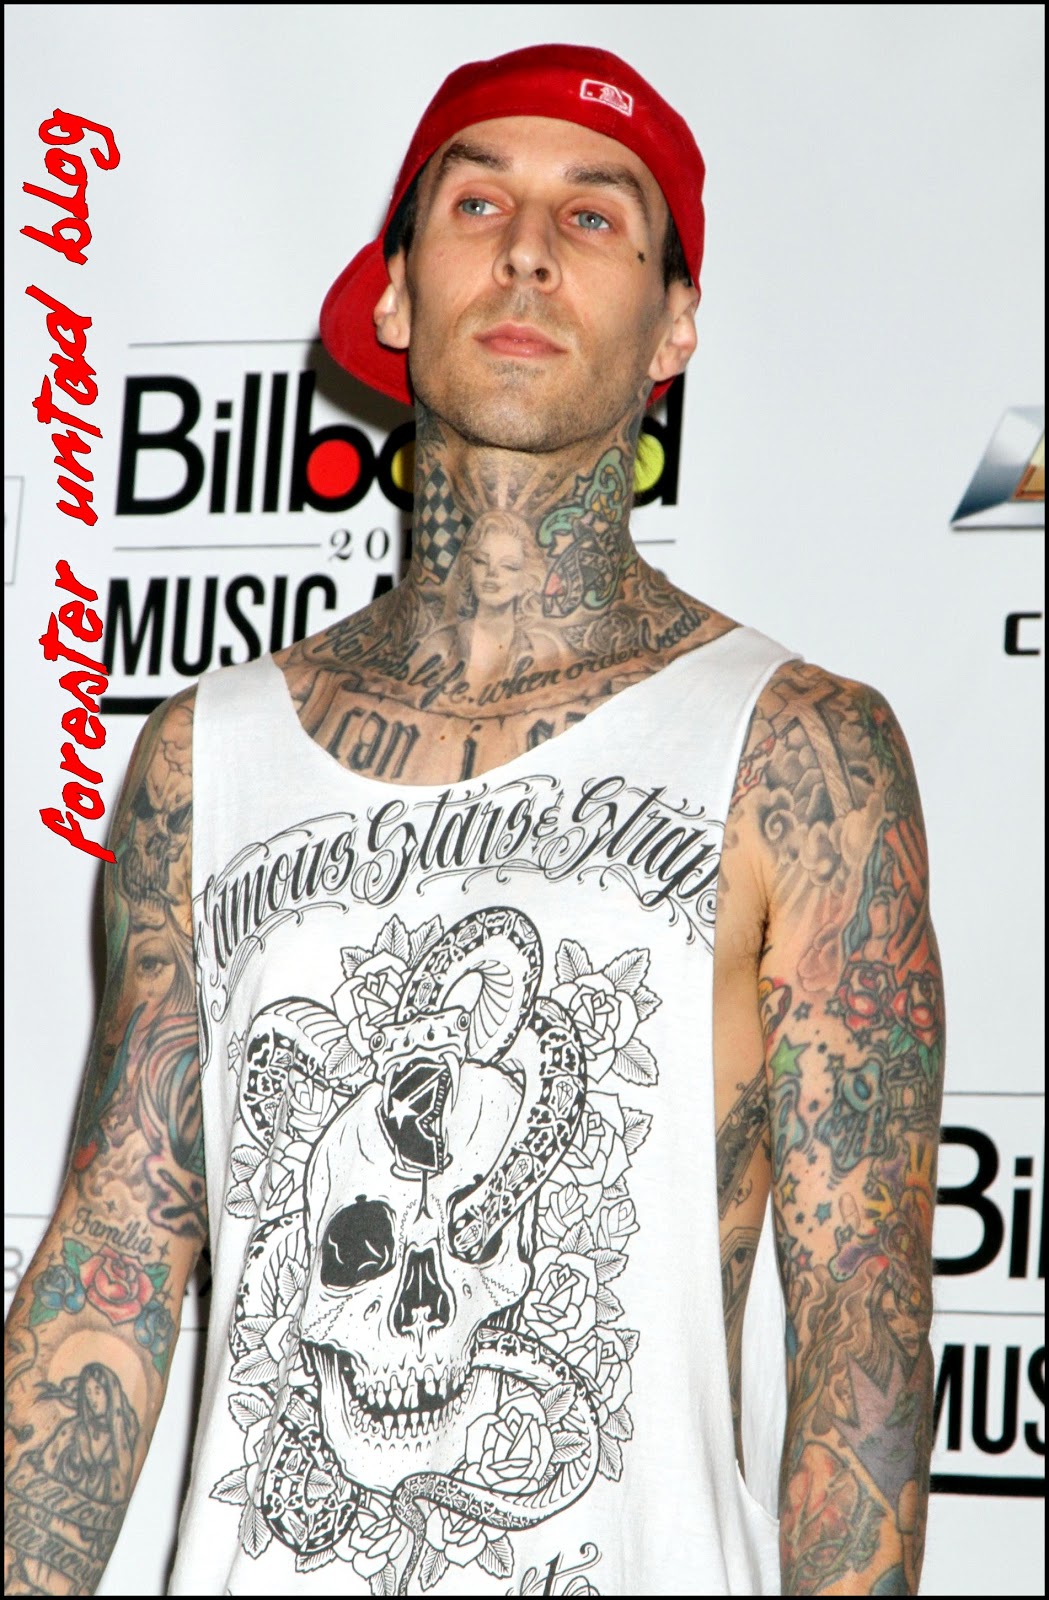 Travis barker has quickly become one of the most influential musicians on t...